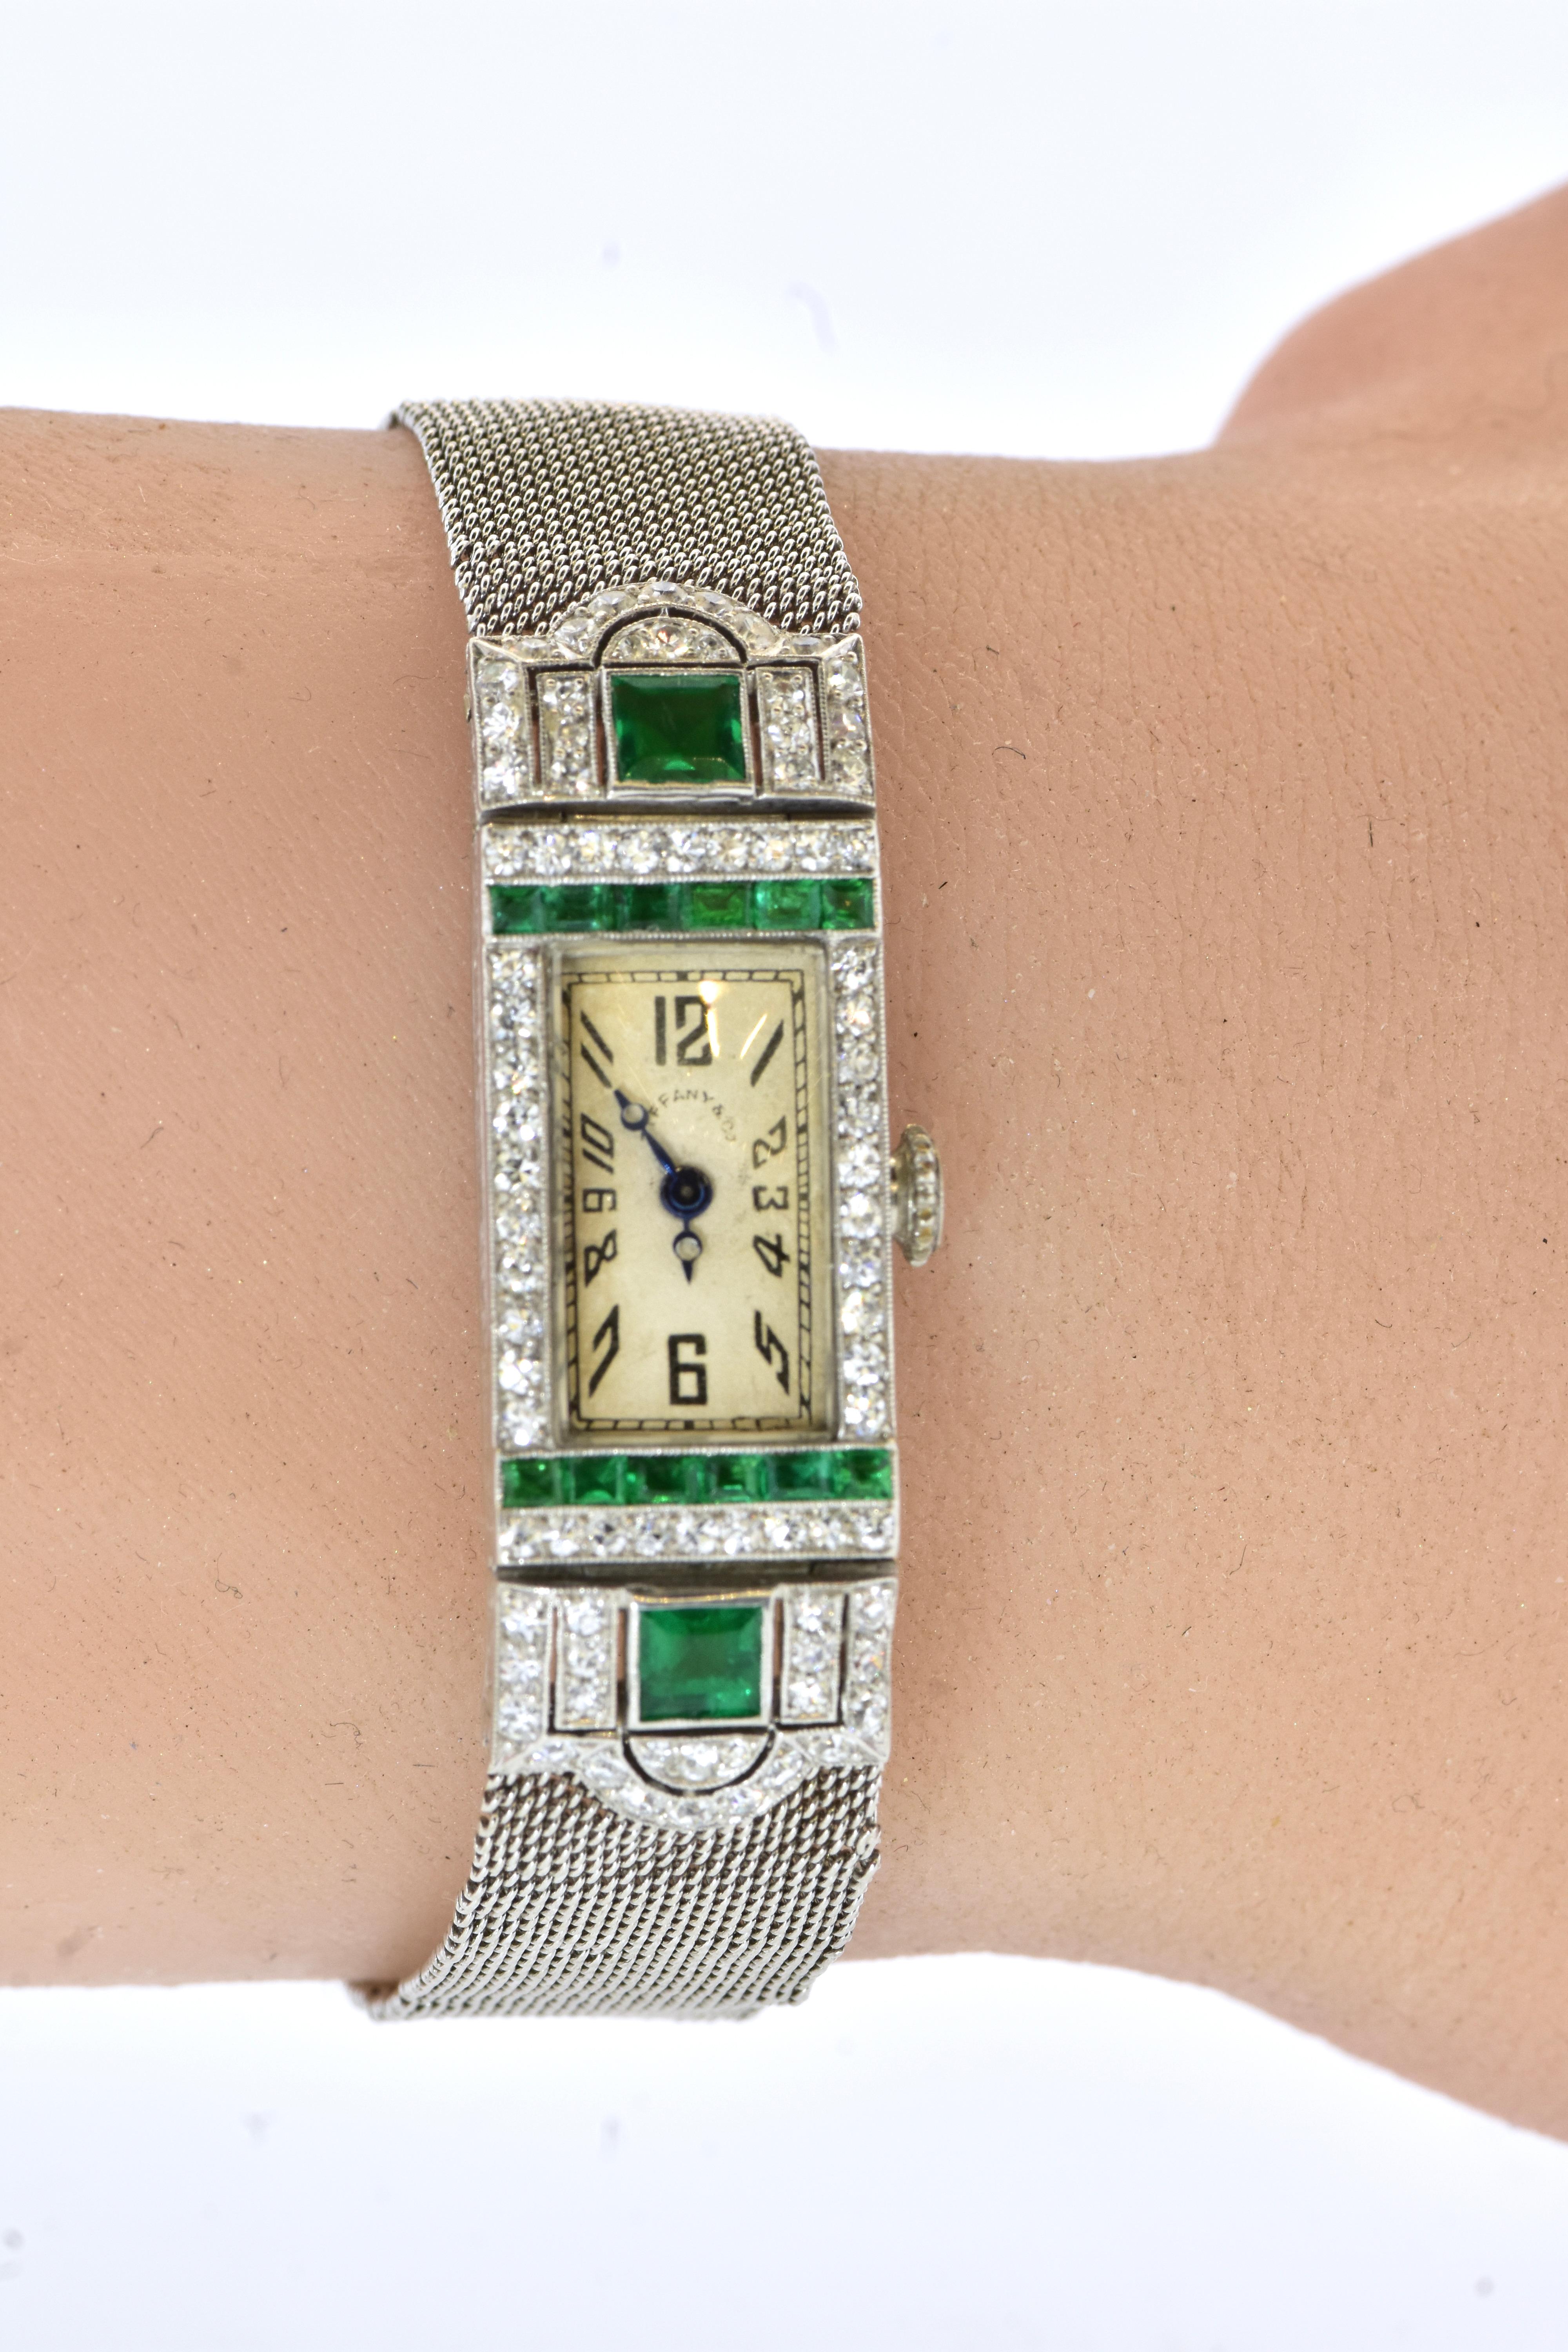 Art Deco Tiffany & Co. diamond, emerald and platinum wristwatch.  A sublime period piece by a great House, this is an elegant and striking accent for the lady's wrist.   Fine natural Colombian emeralds weighing an estimated 1.30 cts.  All of the 20